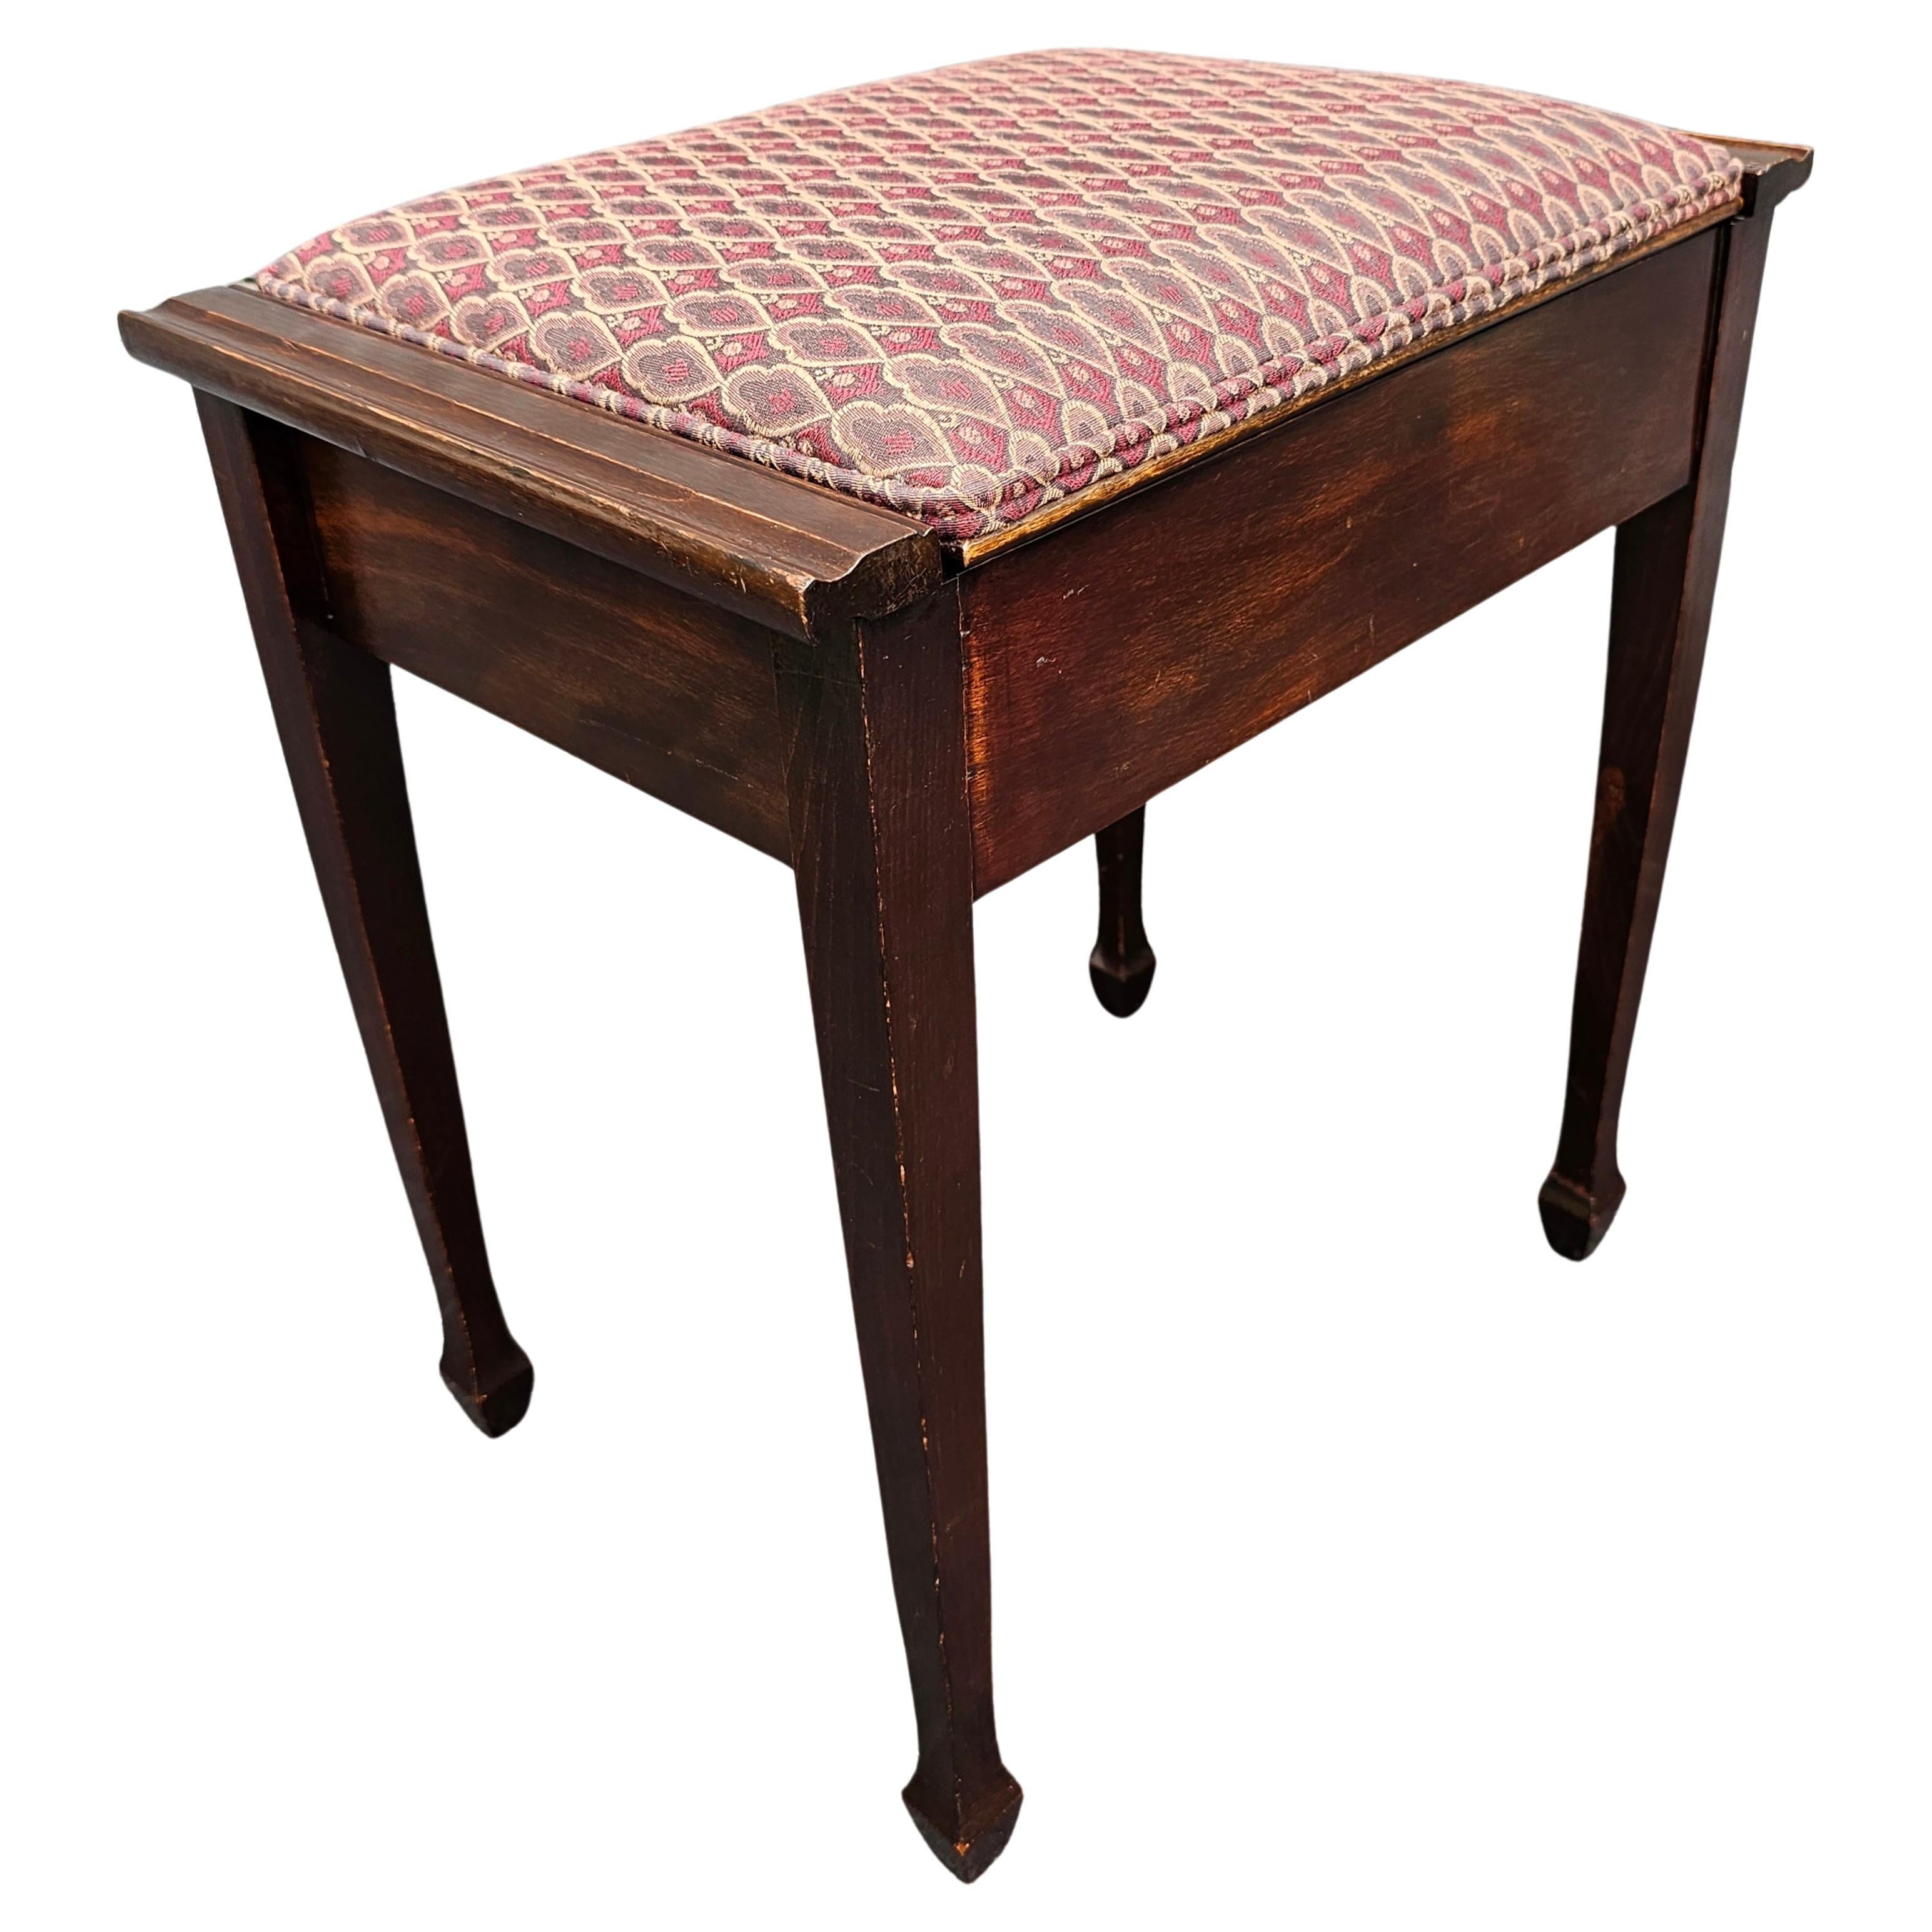 20th Century George III Style Mahogany and Upholstered Hinged-Top Stool / Piano Bench